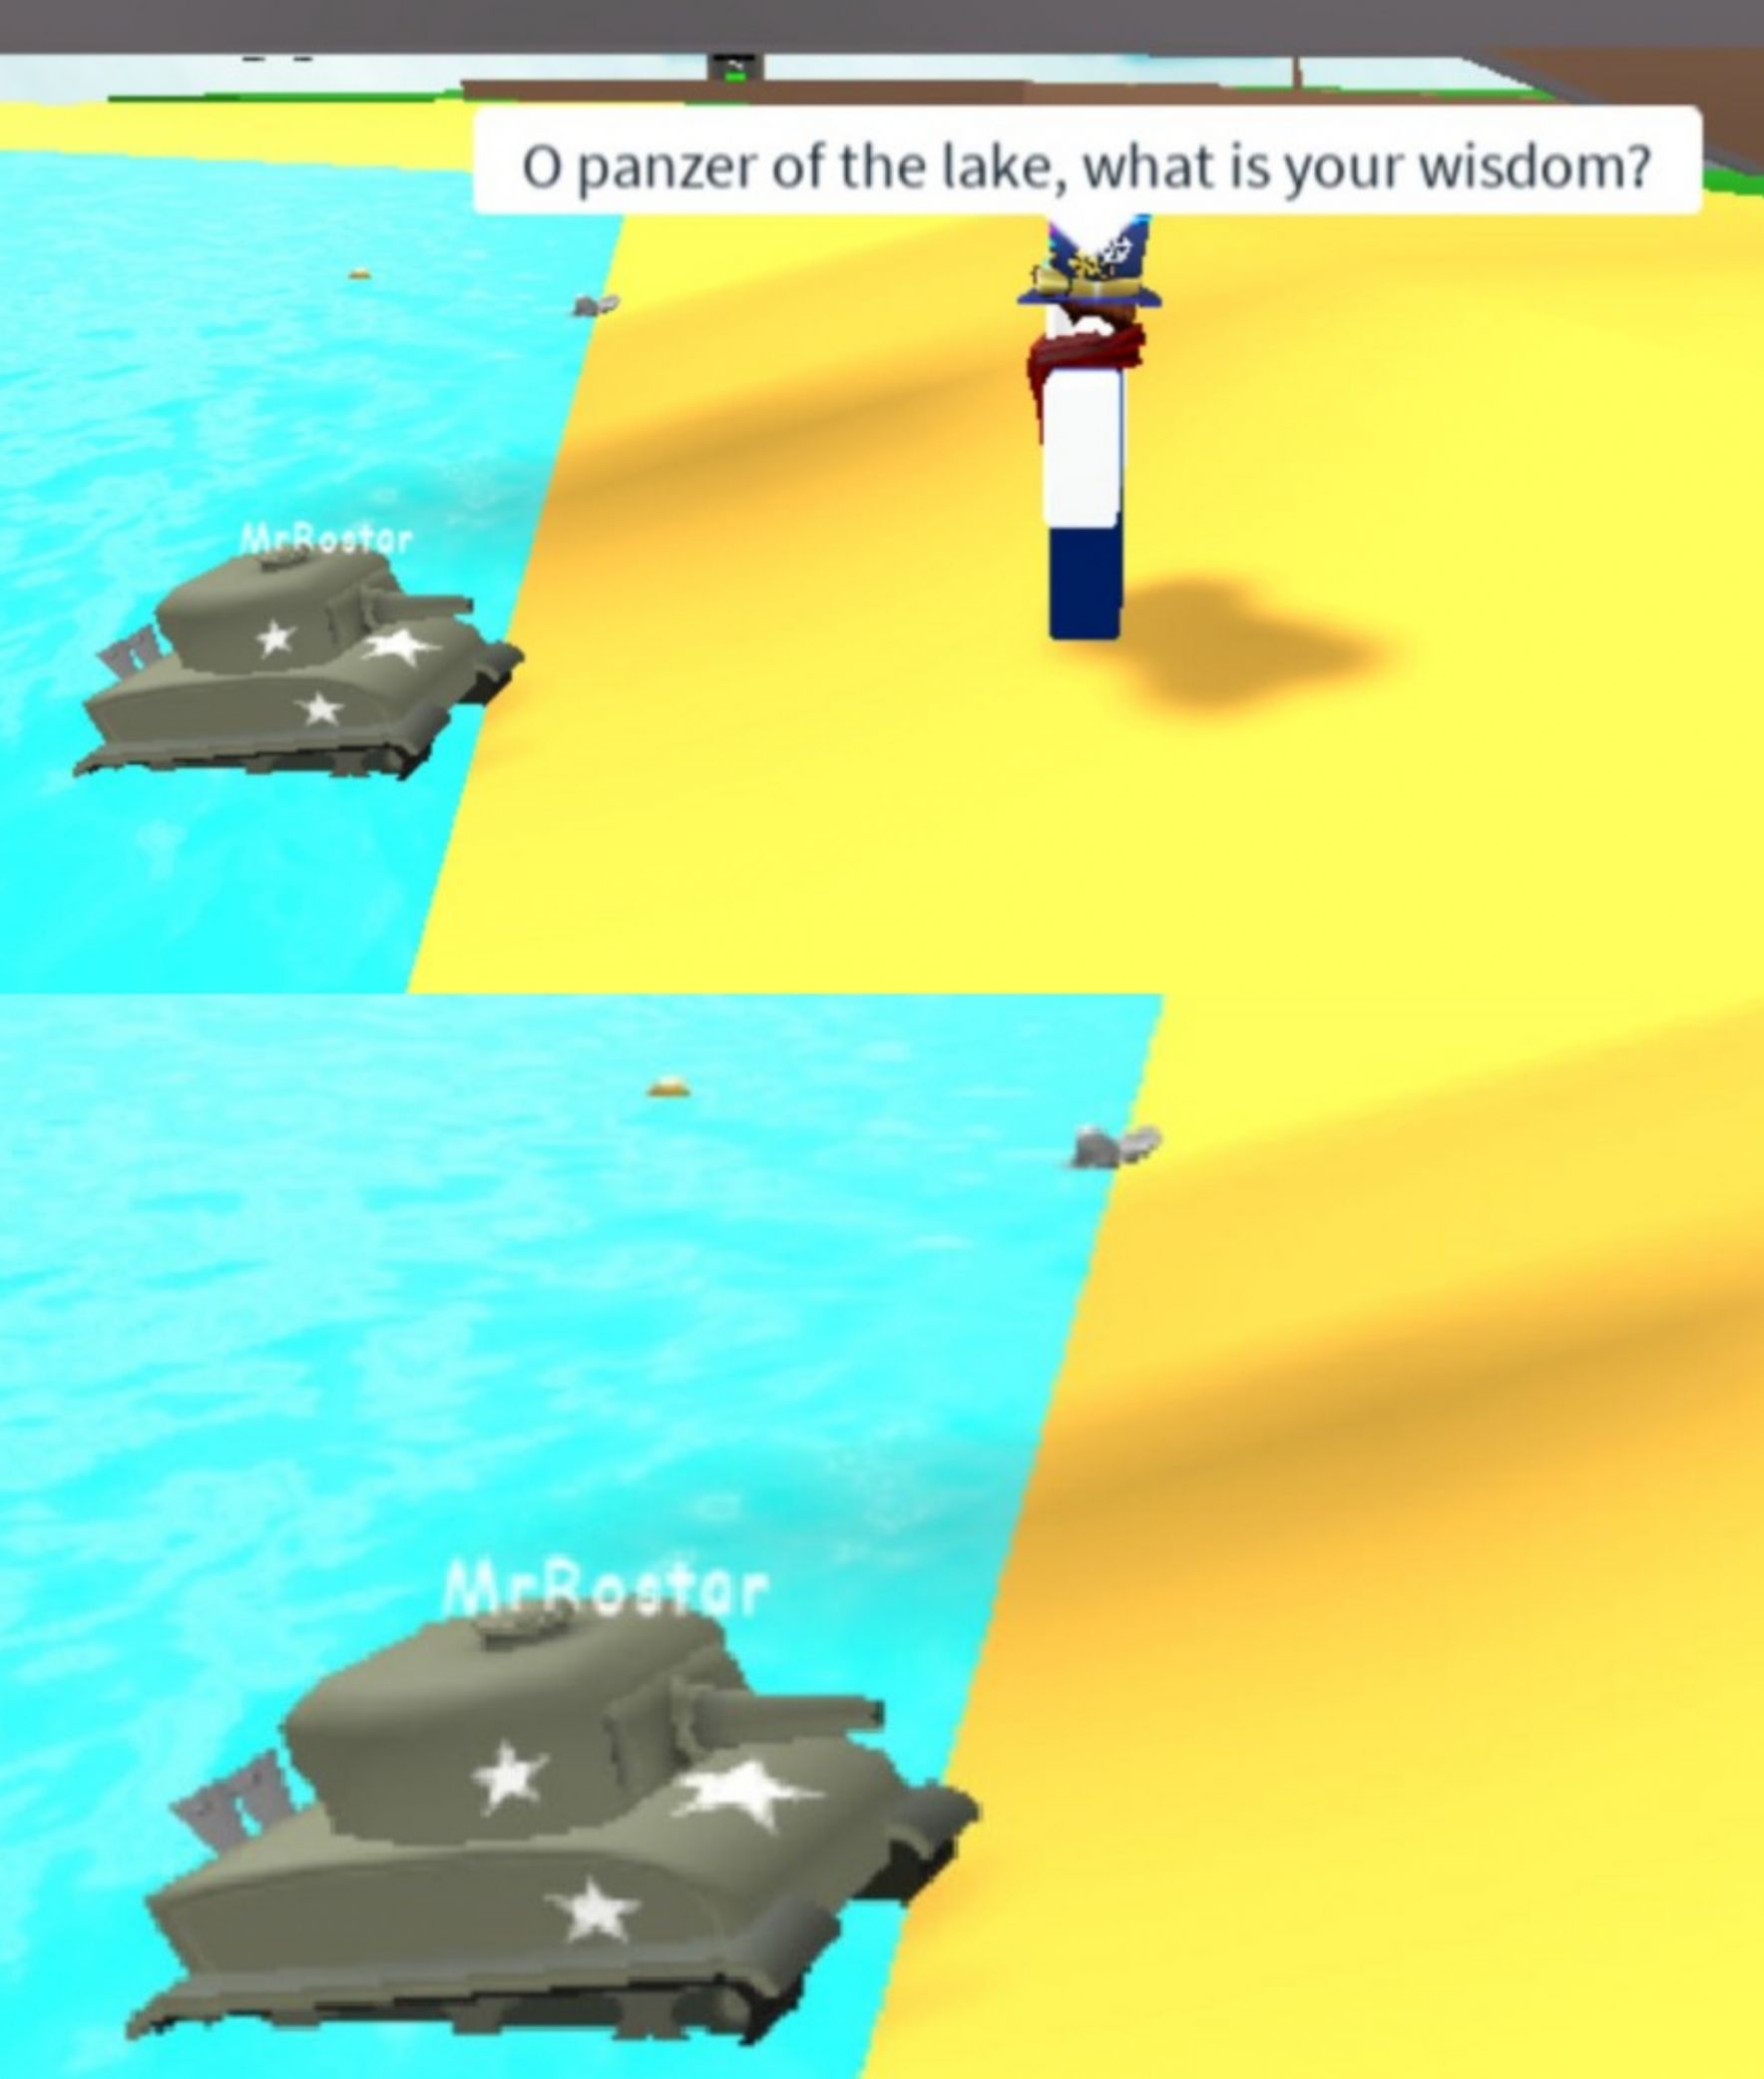 Panzer of the lake (BUT IN ROBLOX) Blank Meme Template